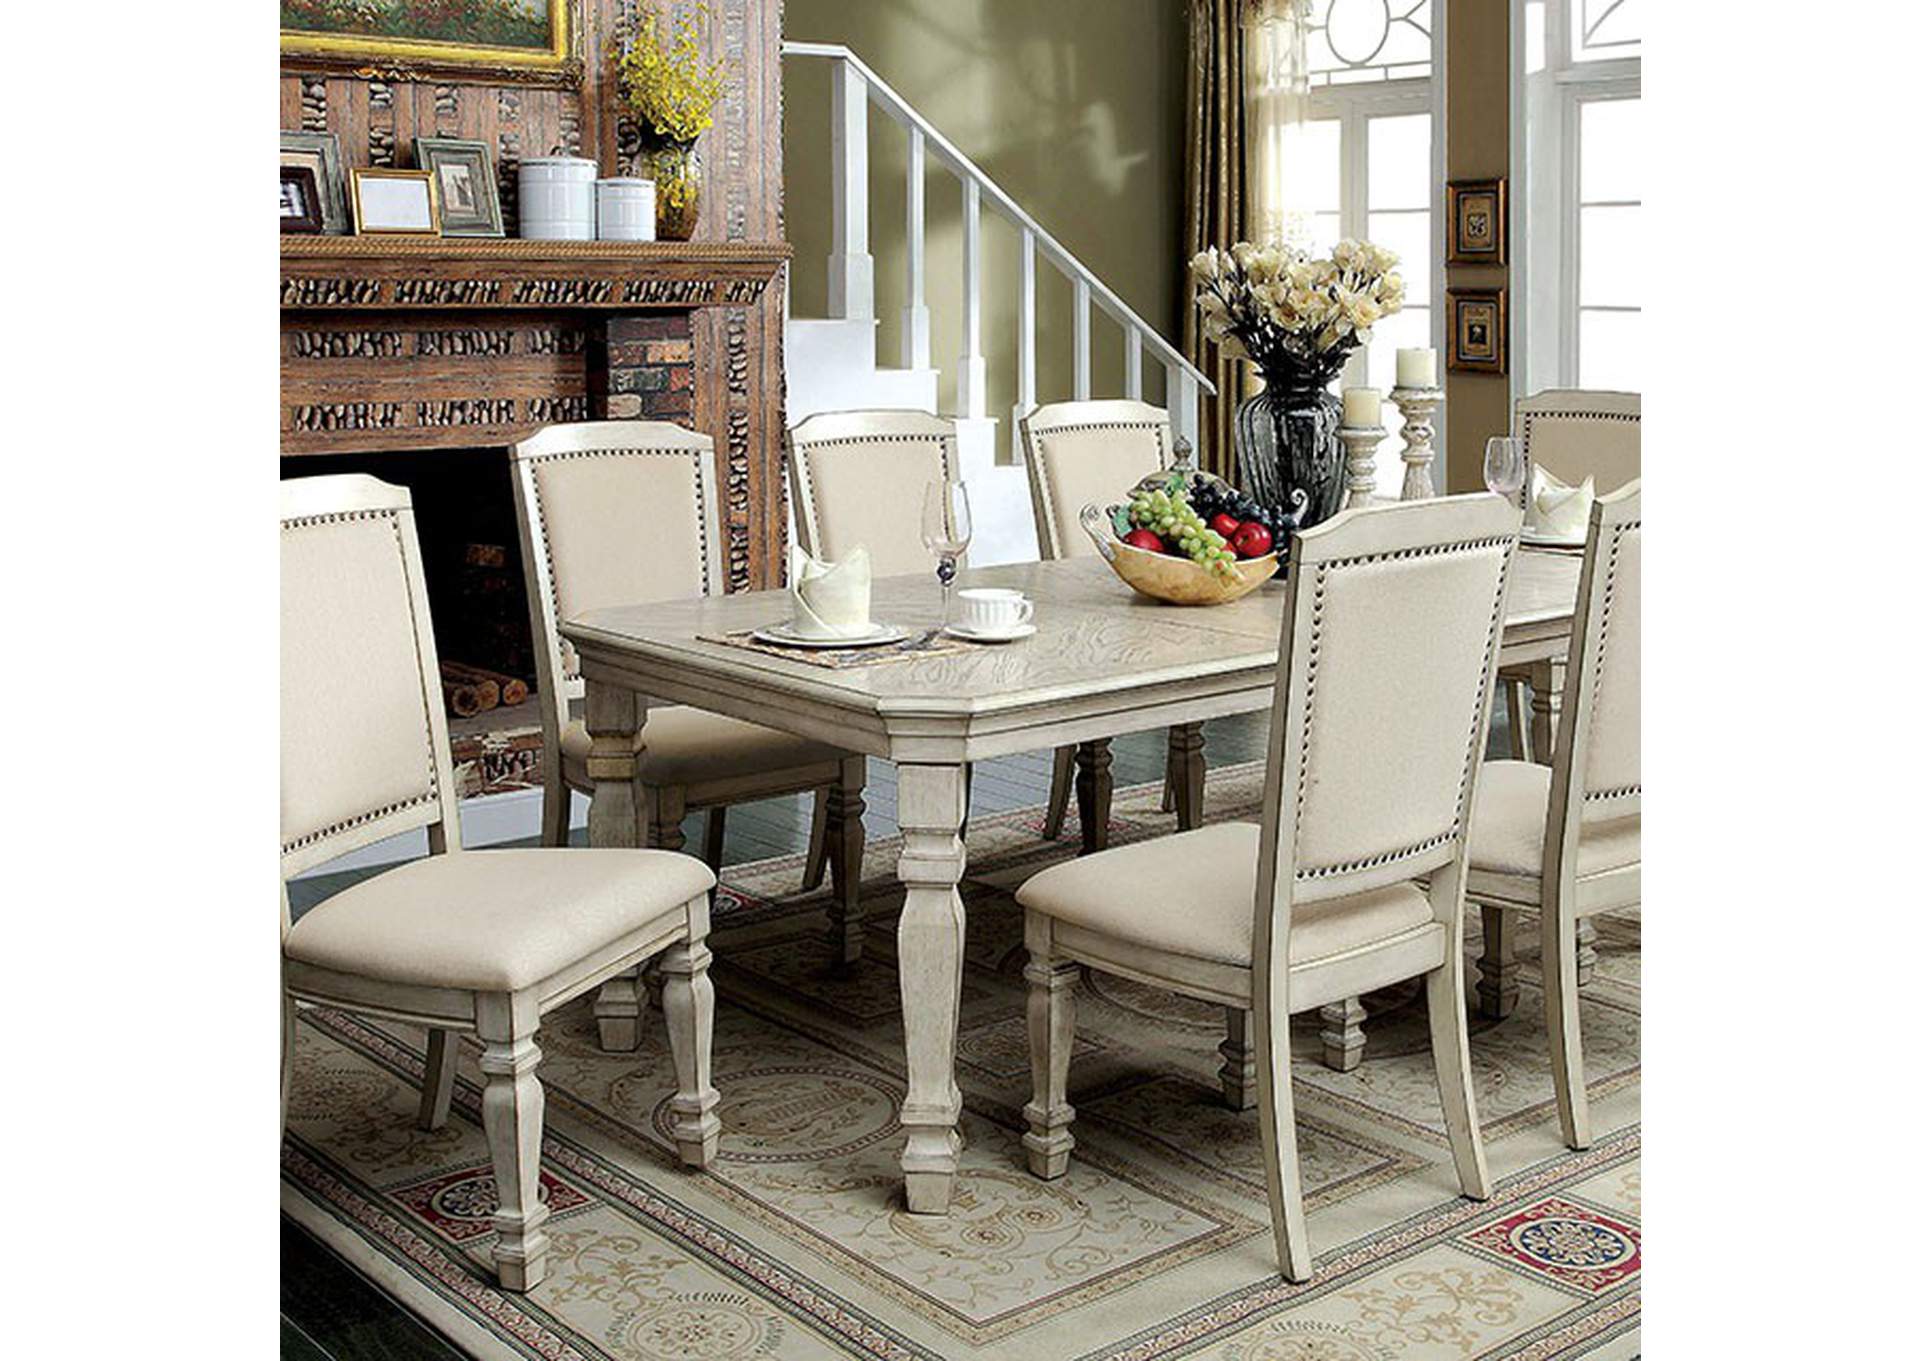 Holcroft Antique White Dining Table, Antique White Dining Room Set